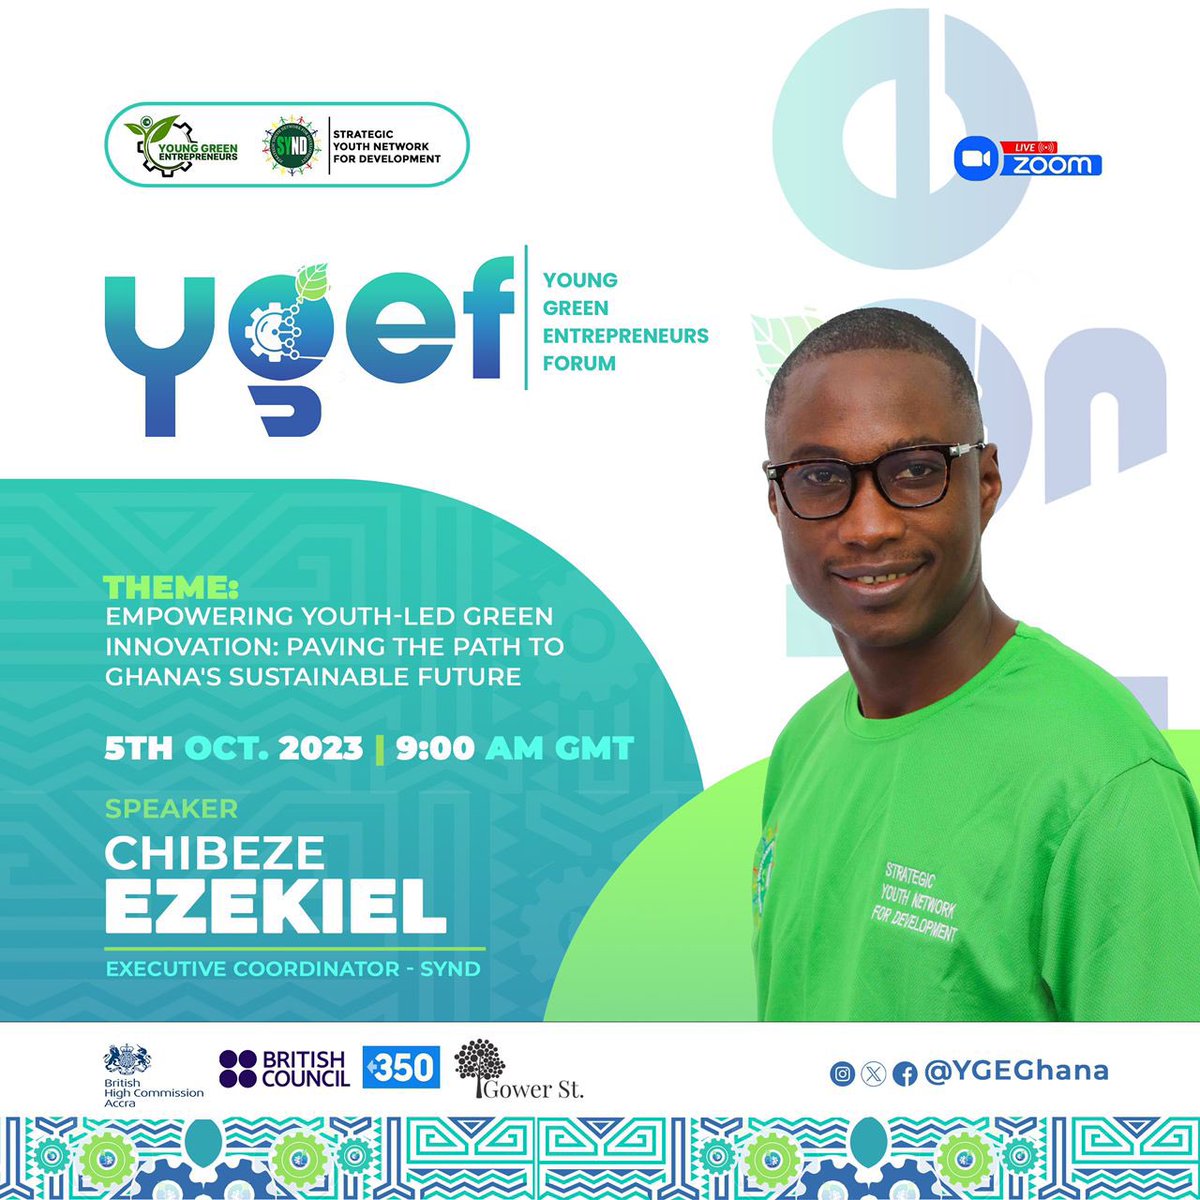 We are excited to introduce Chibeze Ezekiel, the Executive Coordinator of SYND and a passionate environmentalist, as a speaker at the Young Green Entrepreneurs Forum (YGEF) this Thursday.
@YGEGhana #Greenjobs